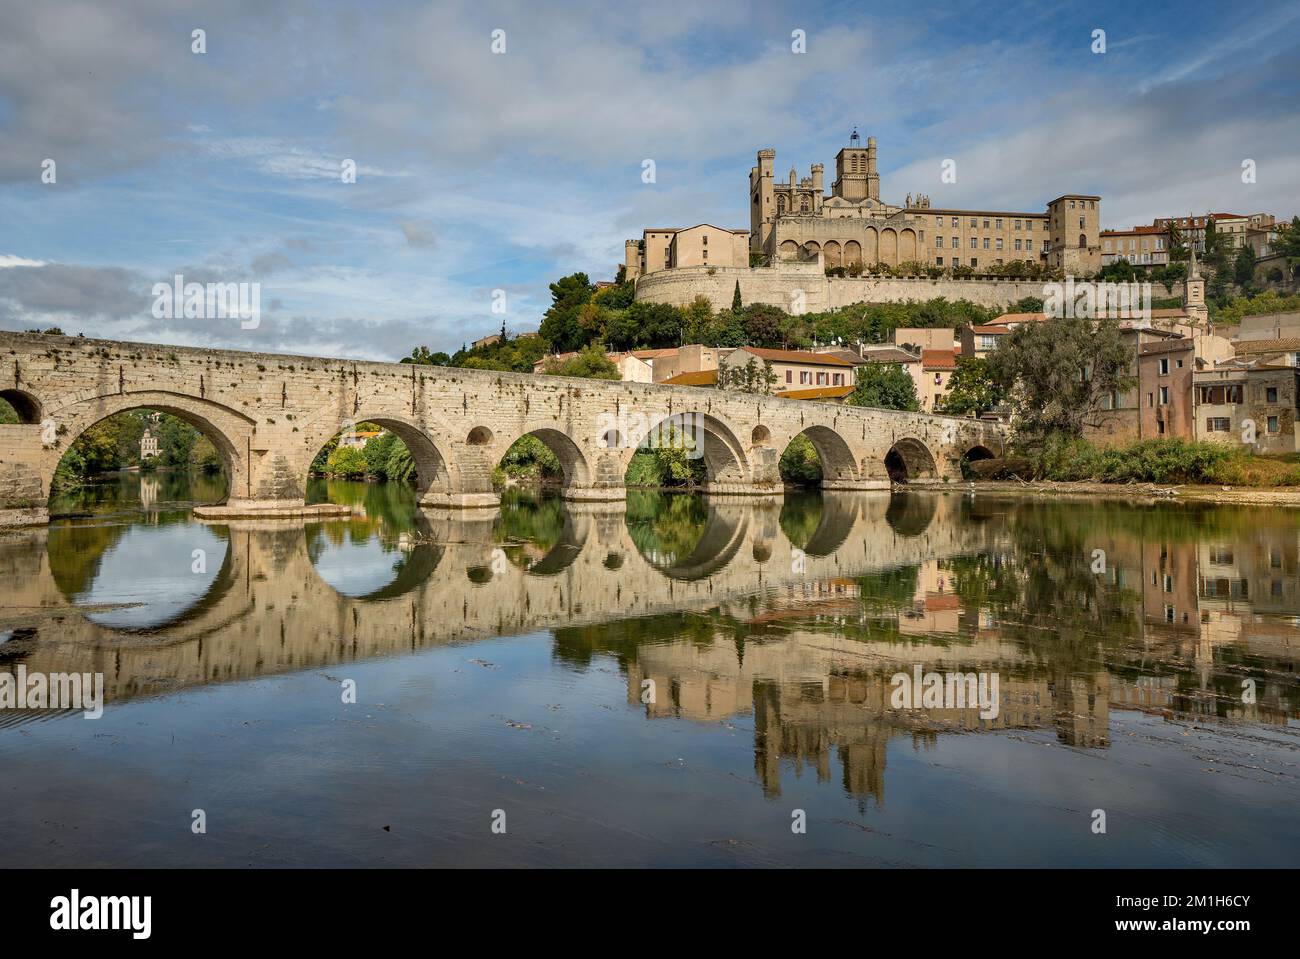 View of the Pont vieux and the cathedral Saint-Nazaire from river Orb in Béziers, Herault, France. Stock Photo